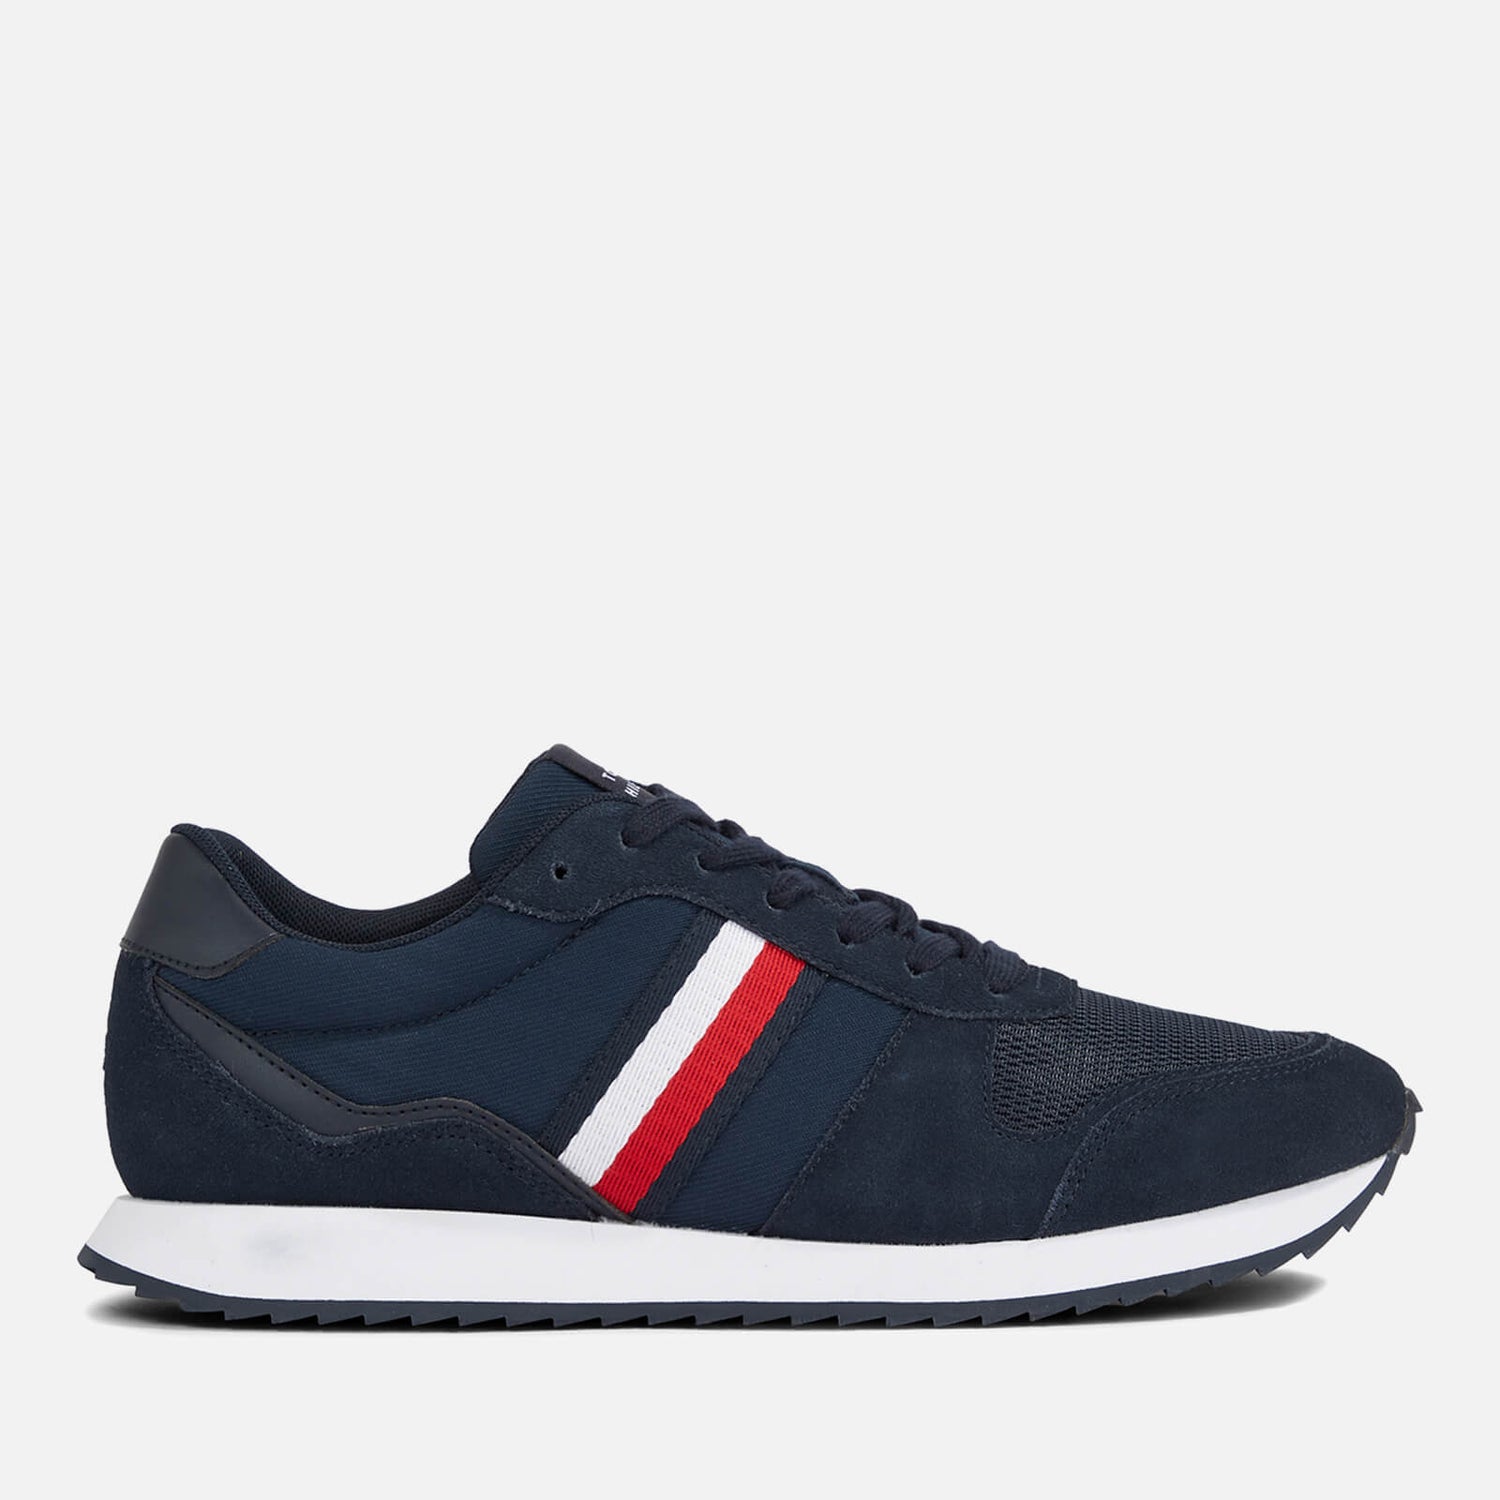 Tommy Hilfiger Men's Evo Mix Suede, Leather and Mesh Trainers - UK 7